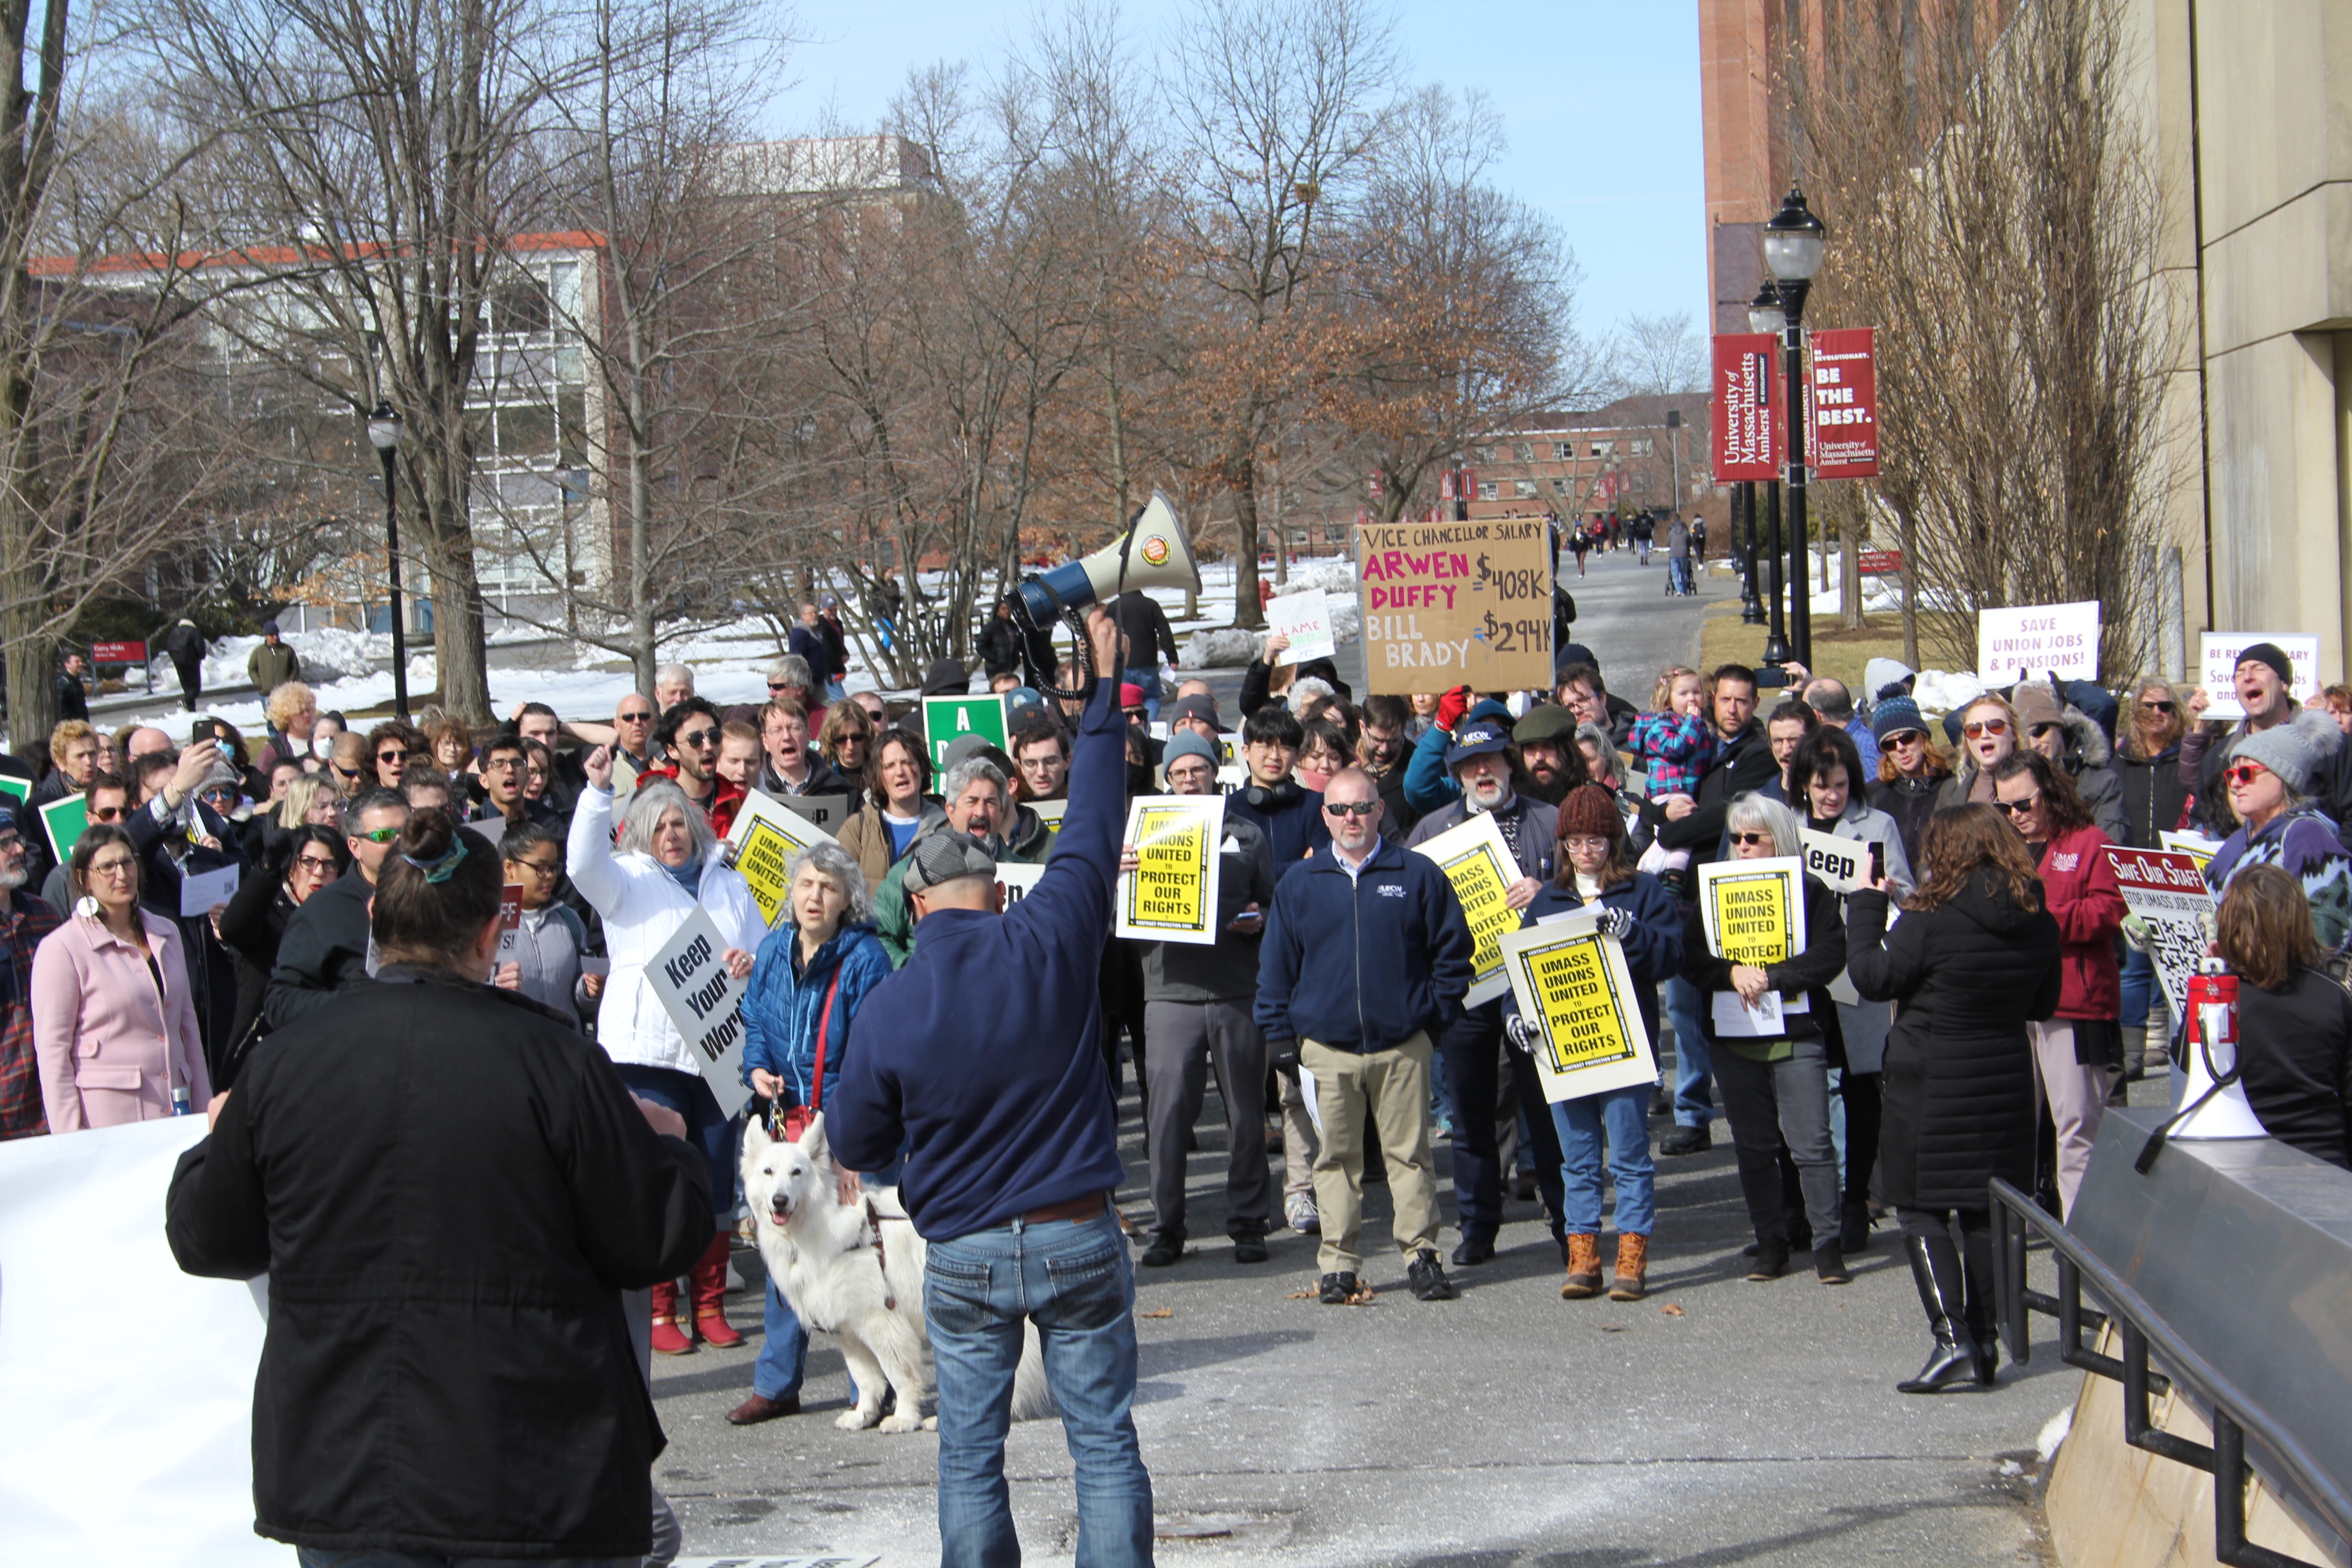 Union busting is disgusting — Massachusetts Jobs with Justice